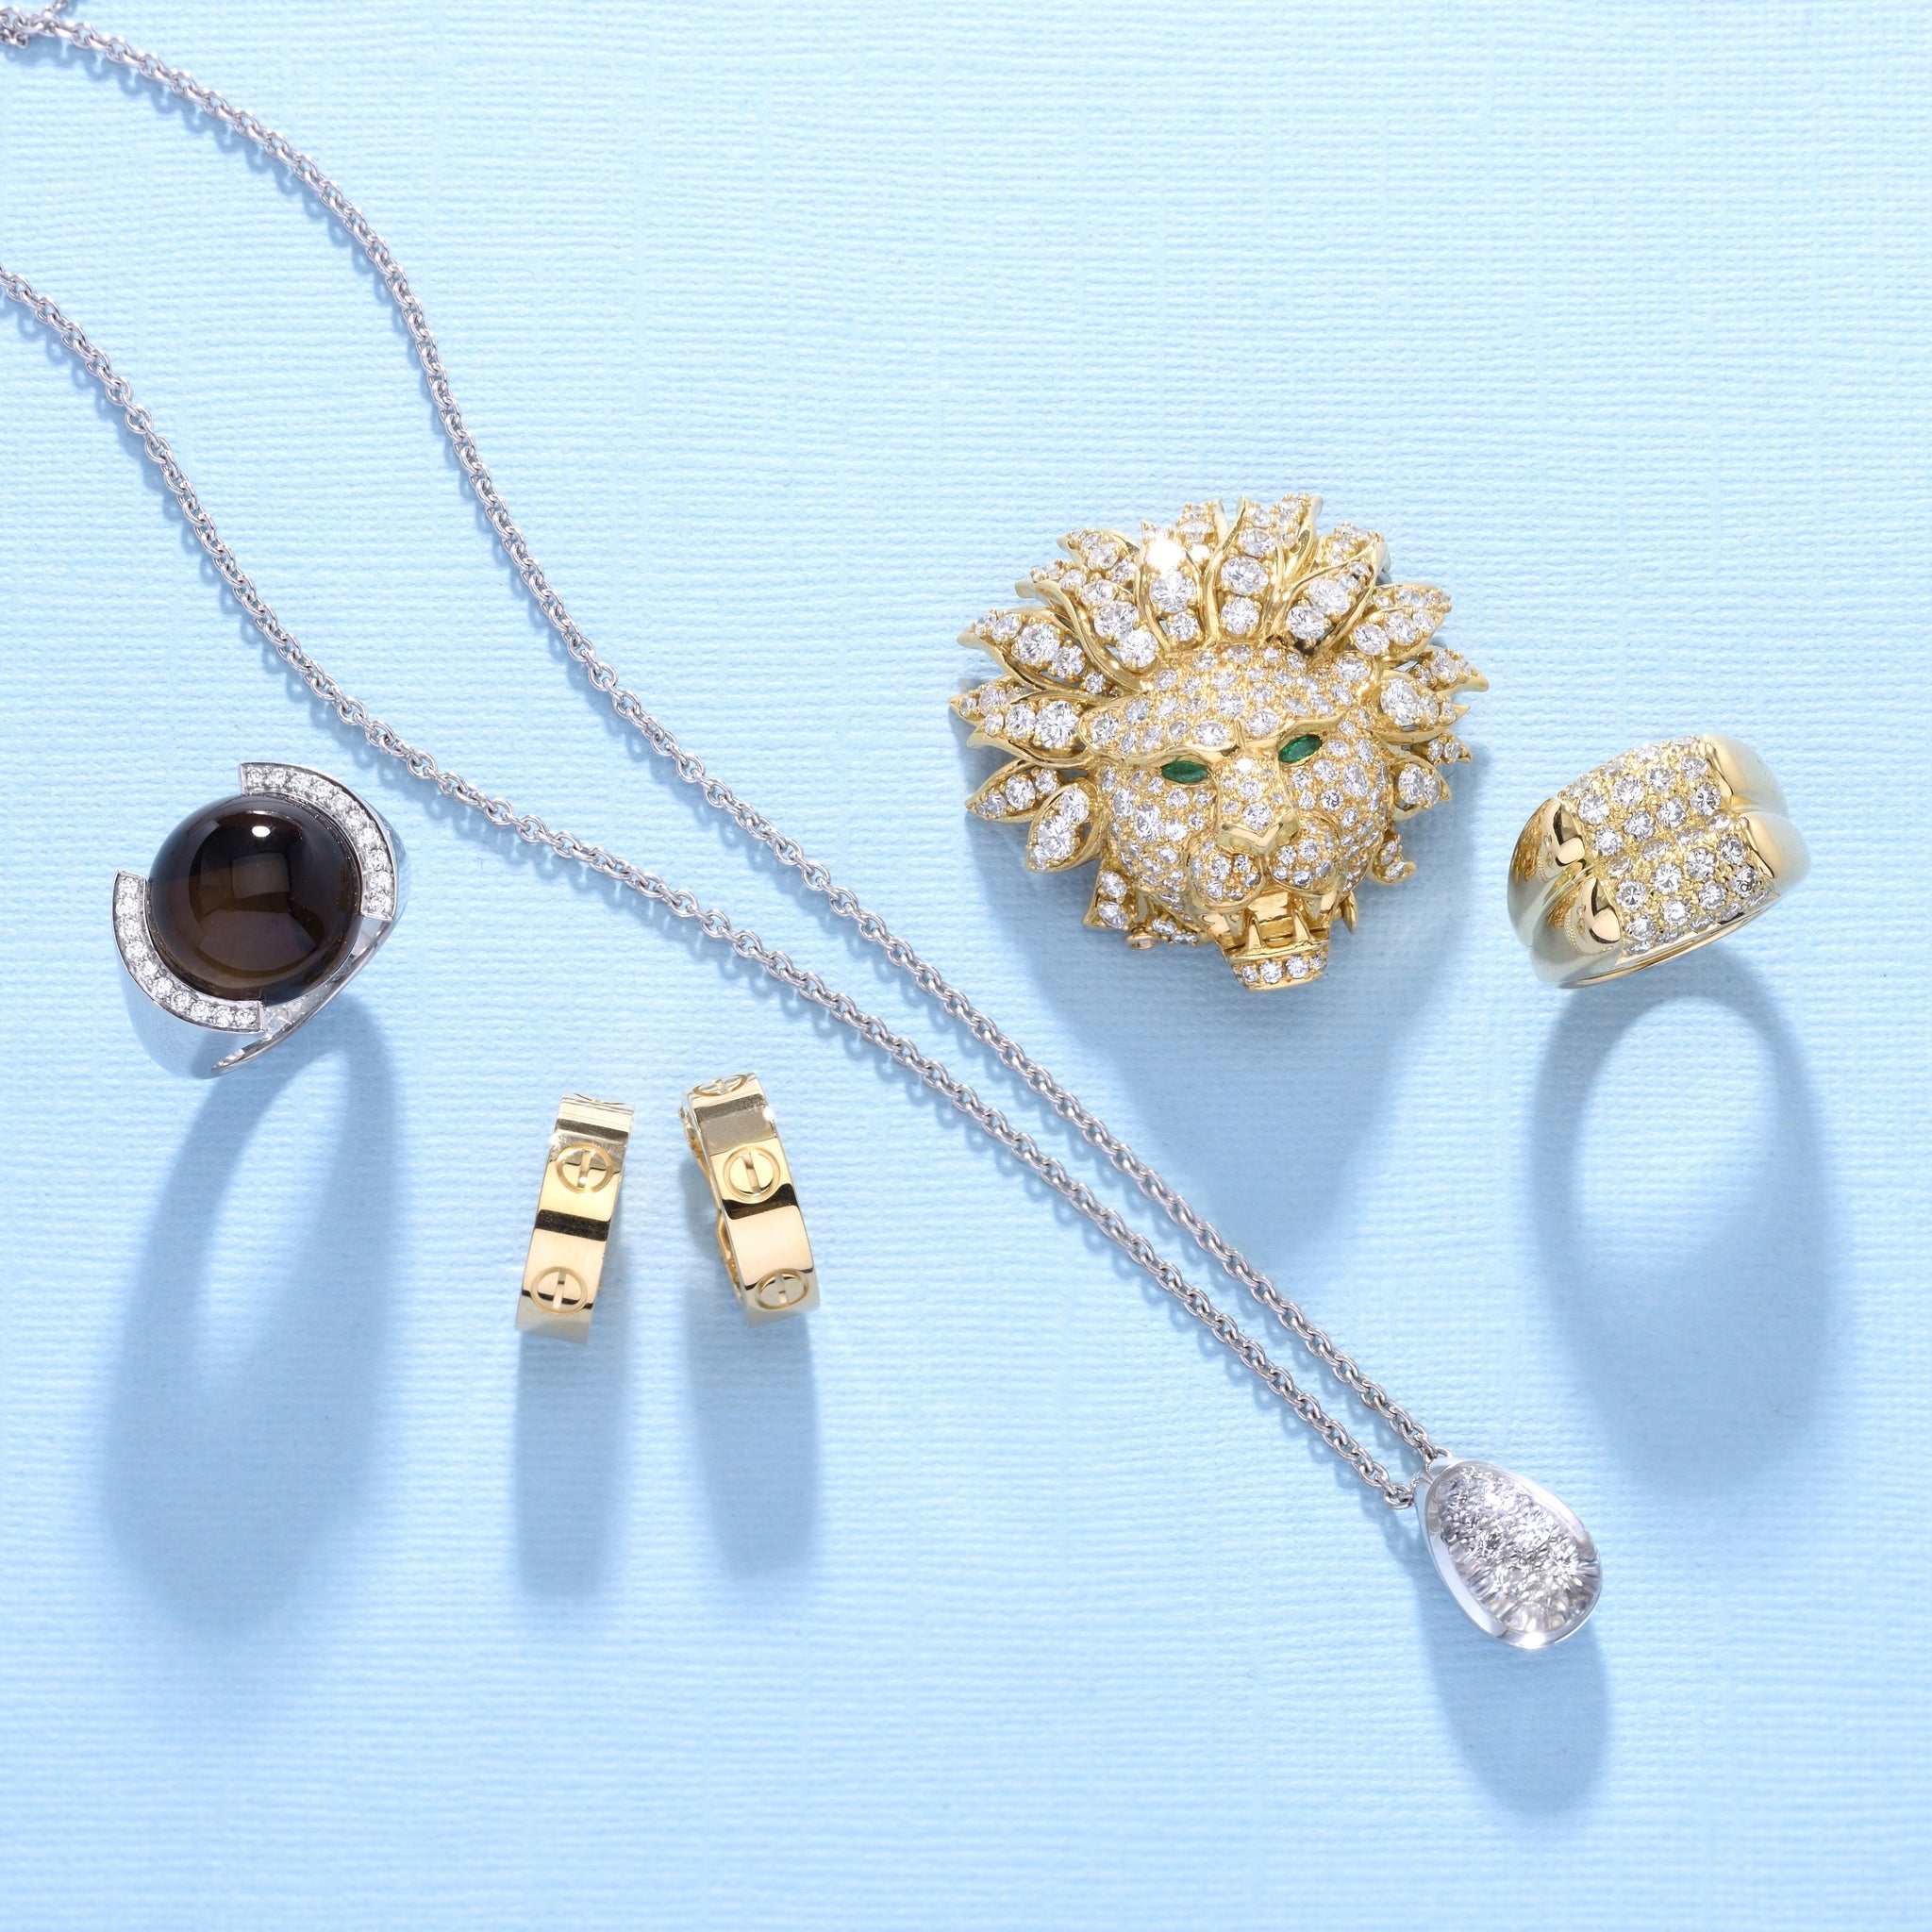 Currently In Our Collection: Signed Jewelry & The History Behind It